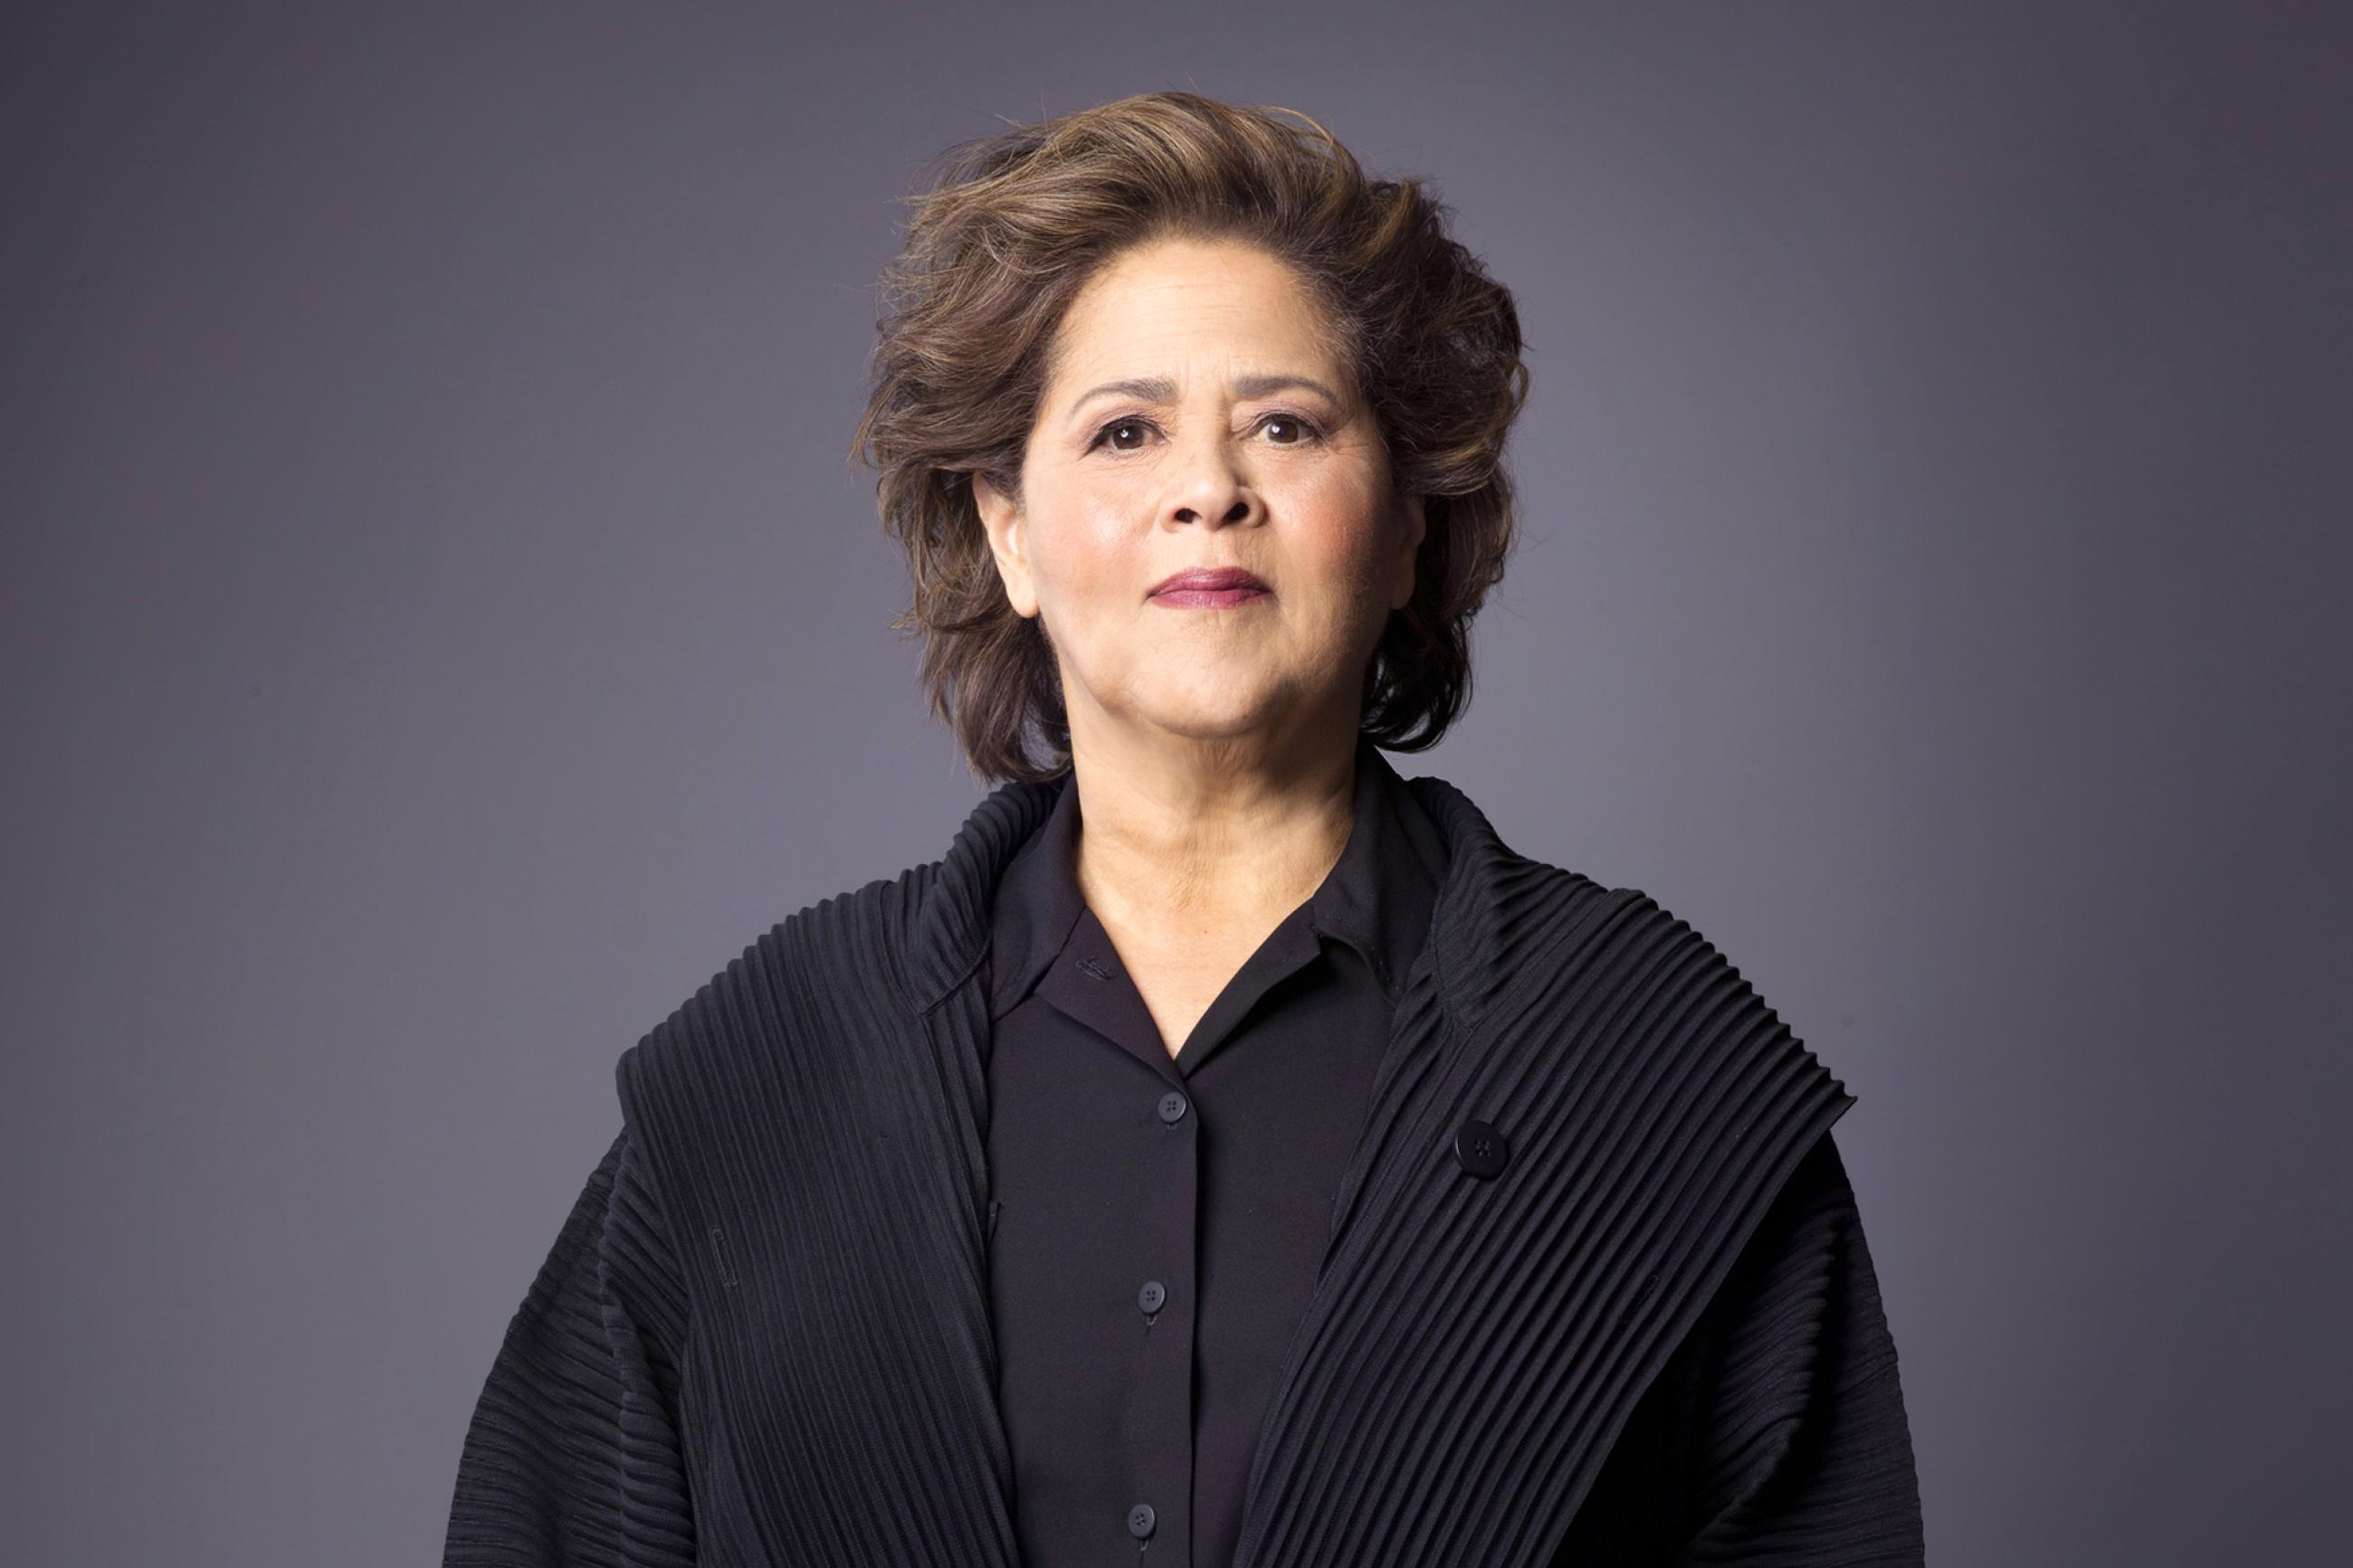 Springfield College Hosts Playwright, Actor, and Educator Anna Deavere Smith September 29